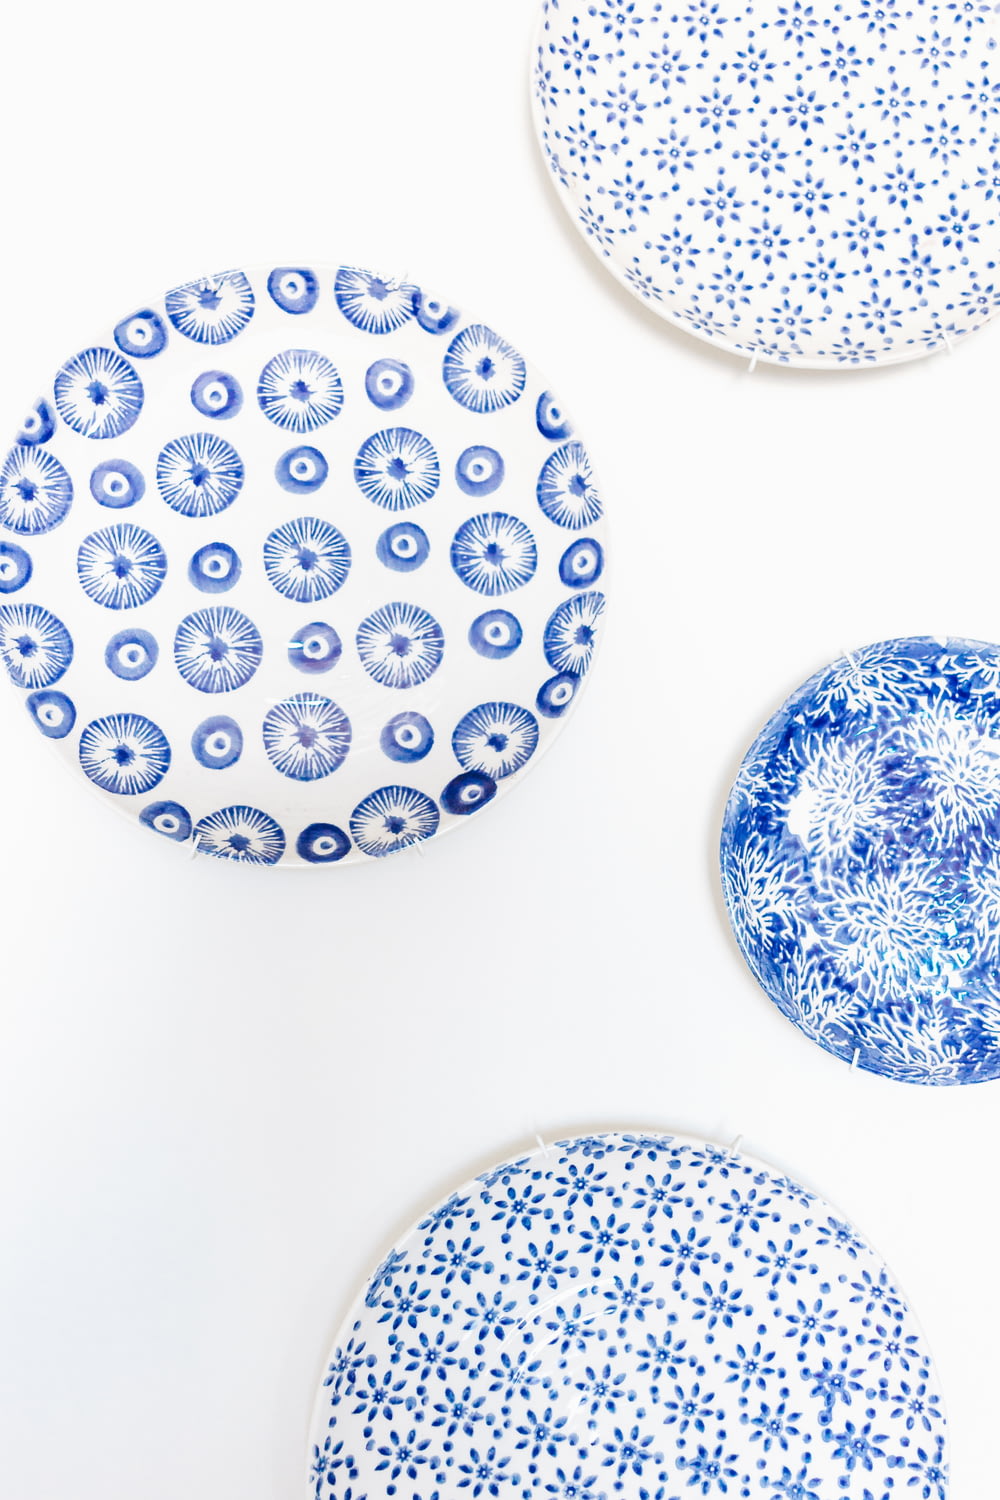 three blue and white plates sitting on top of a table